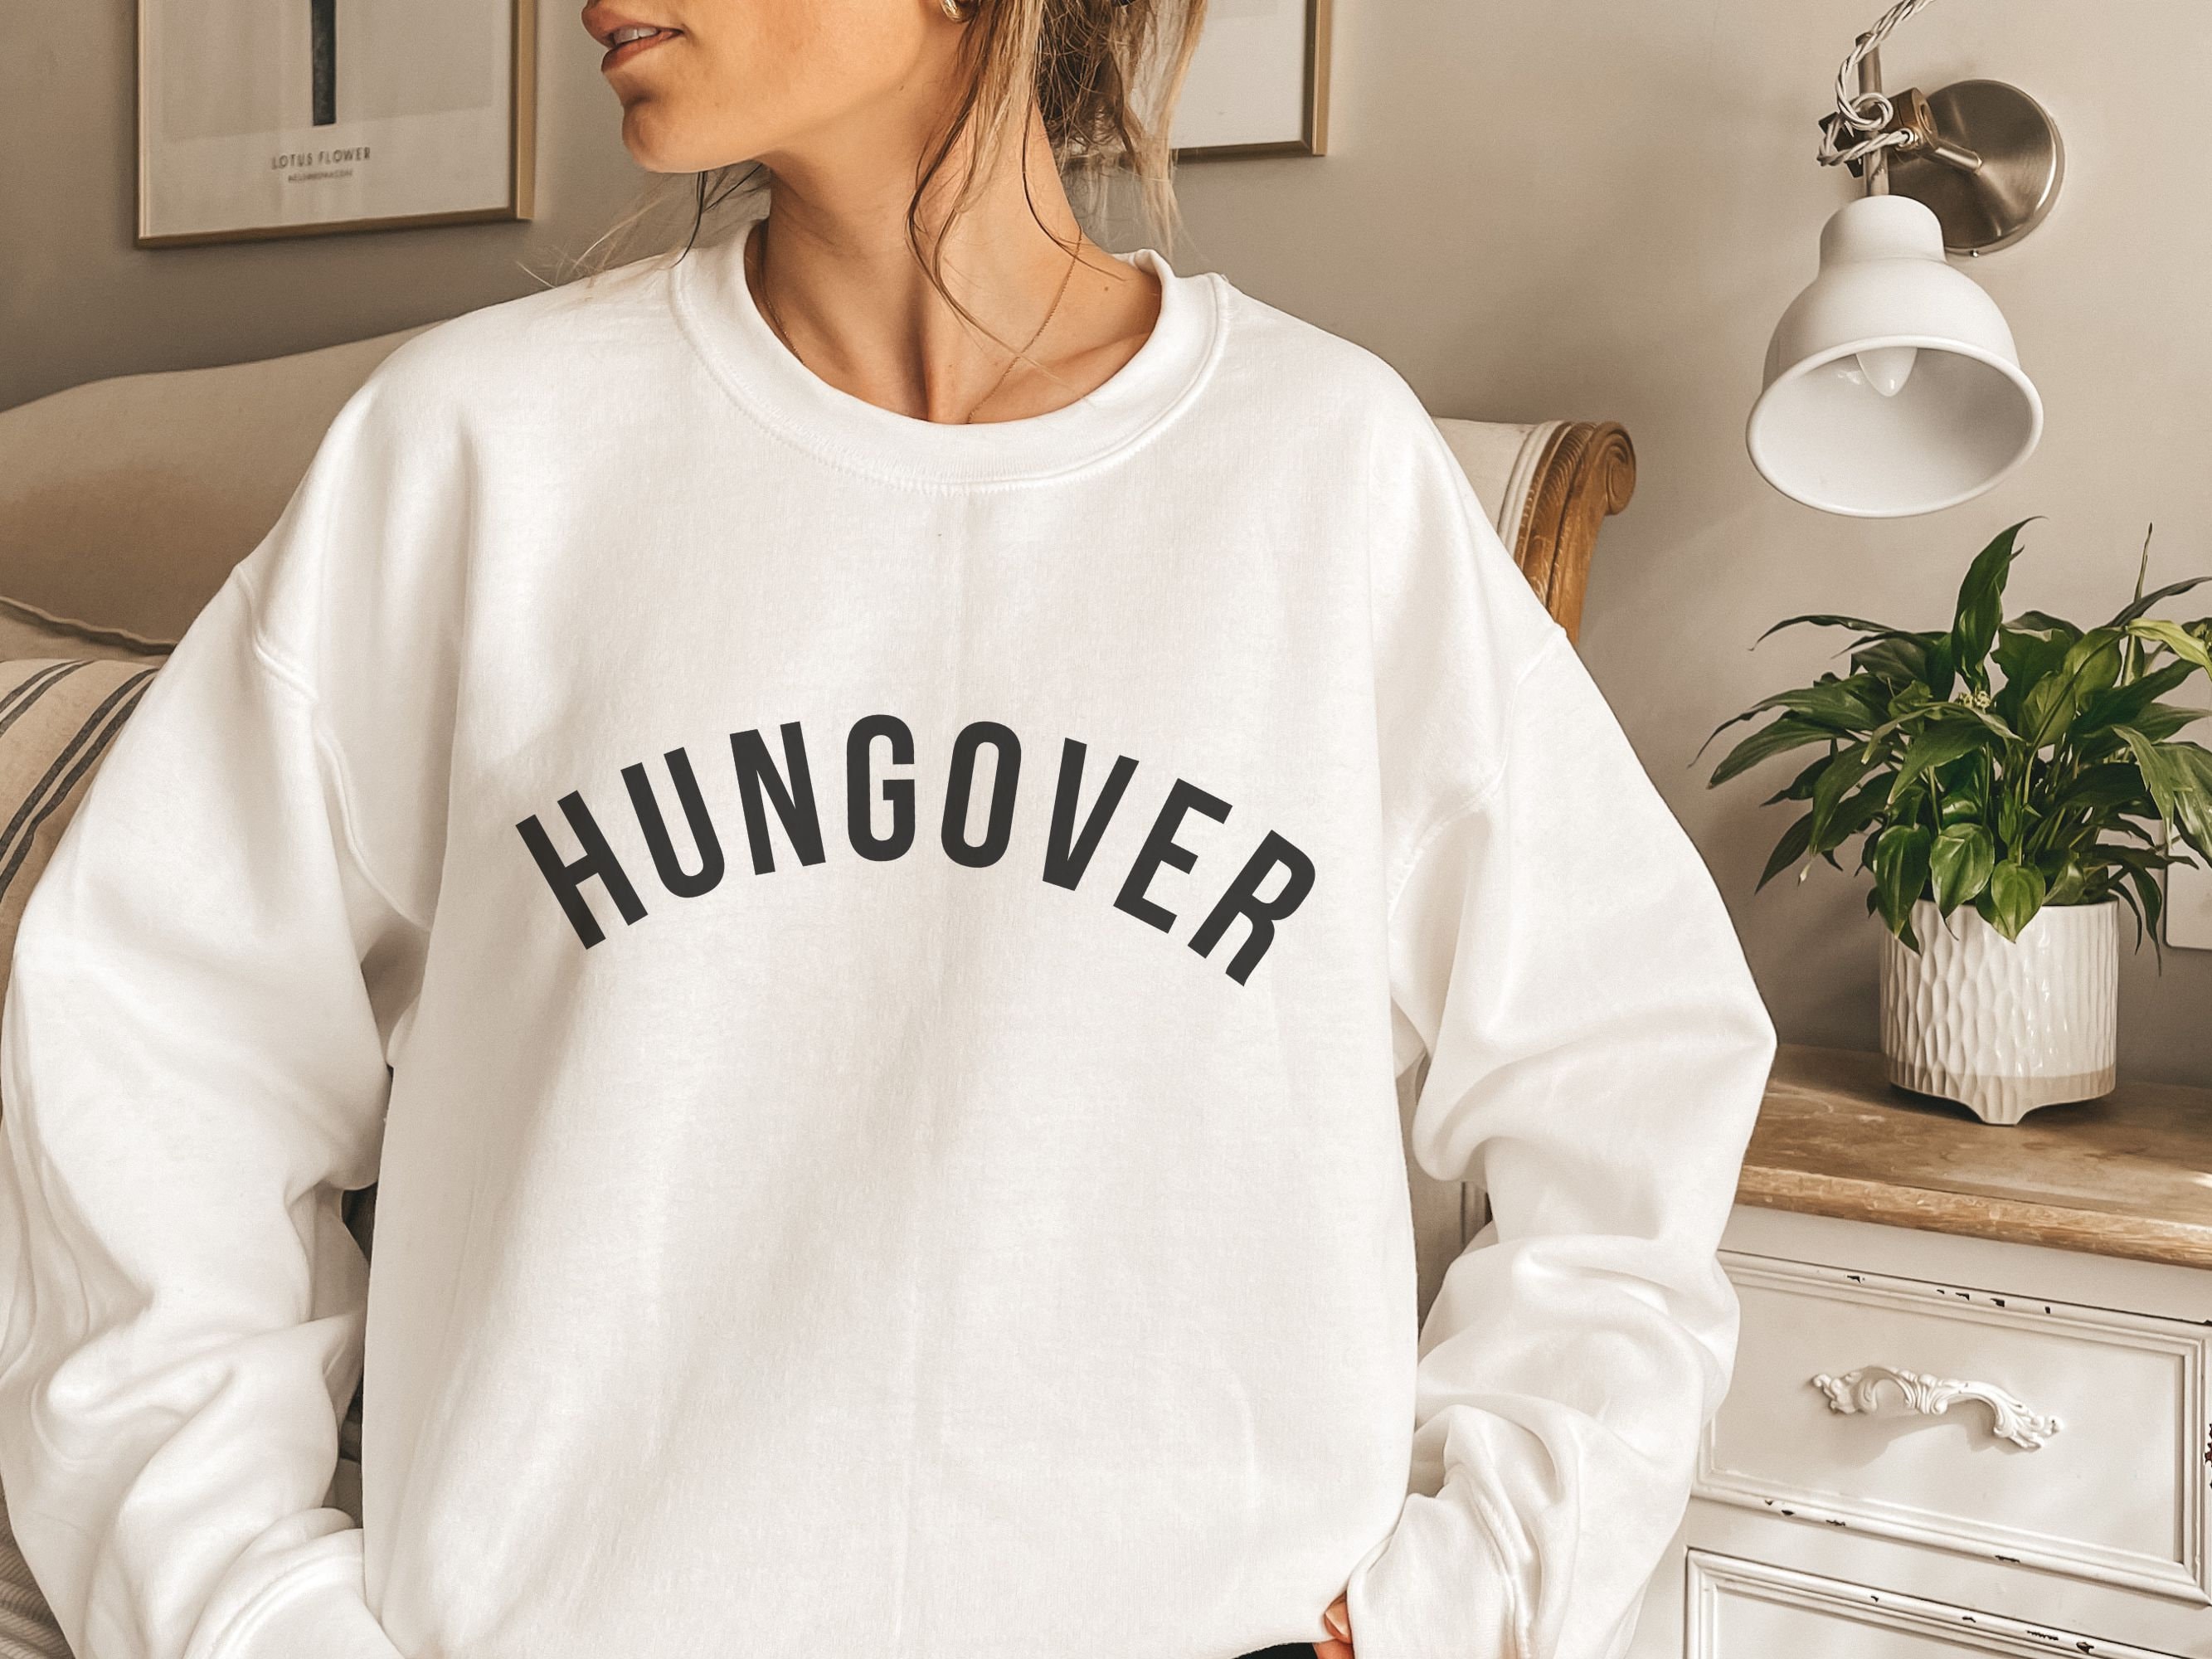 This Is My Drinking T-shirt Funny Shirt Hungover Gift Let's Drink